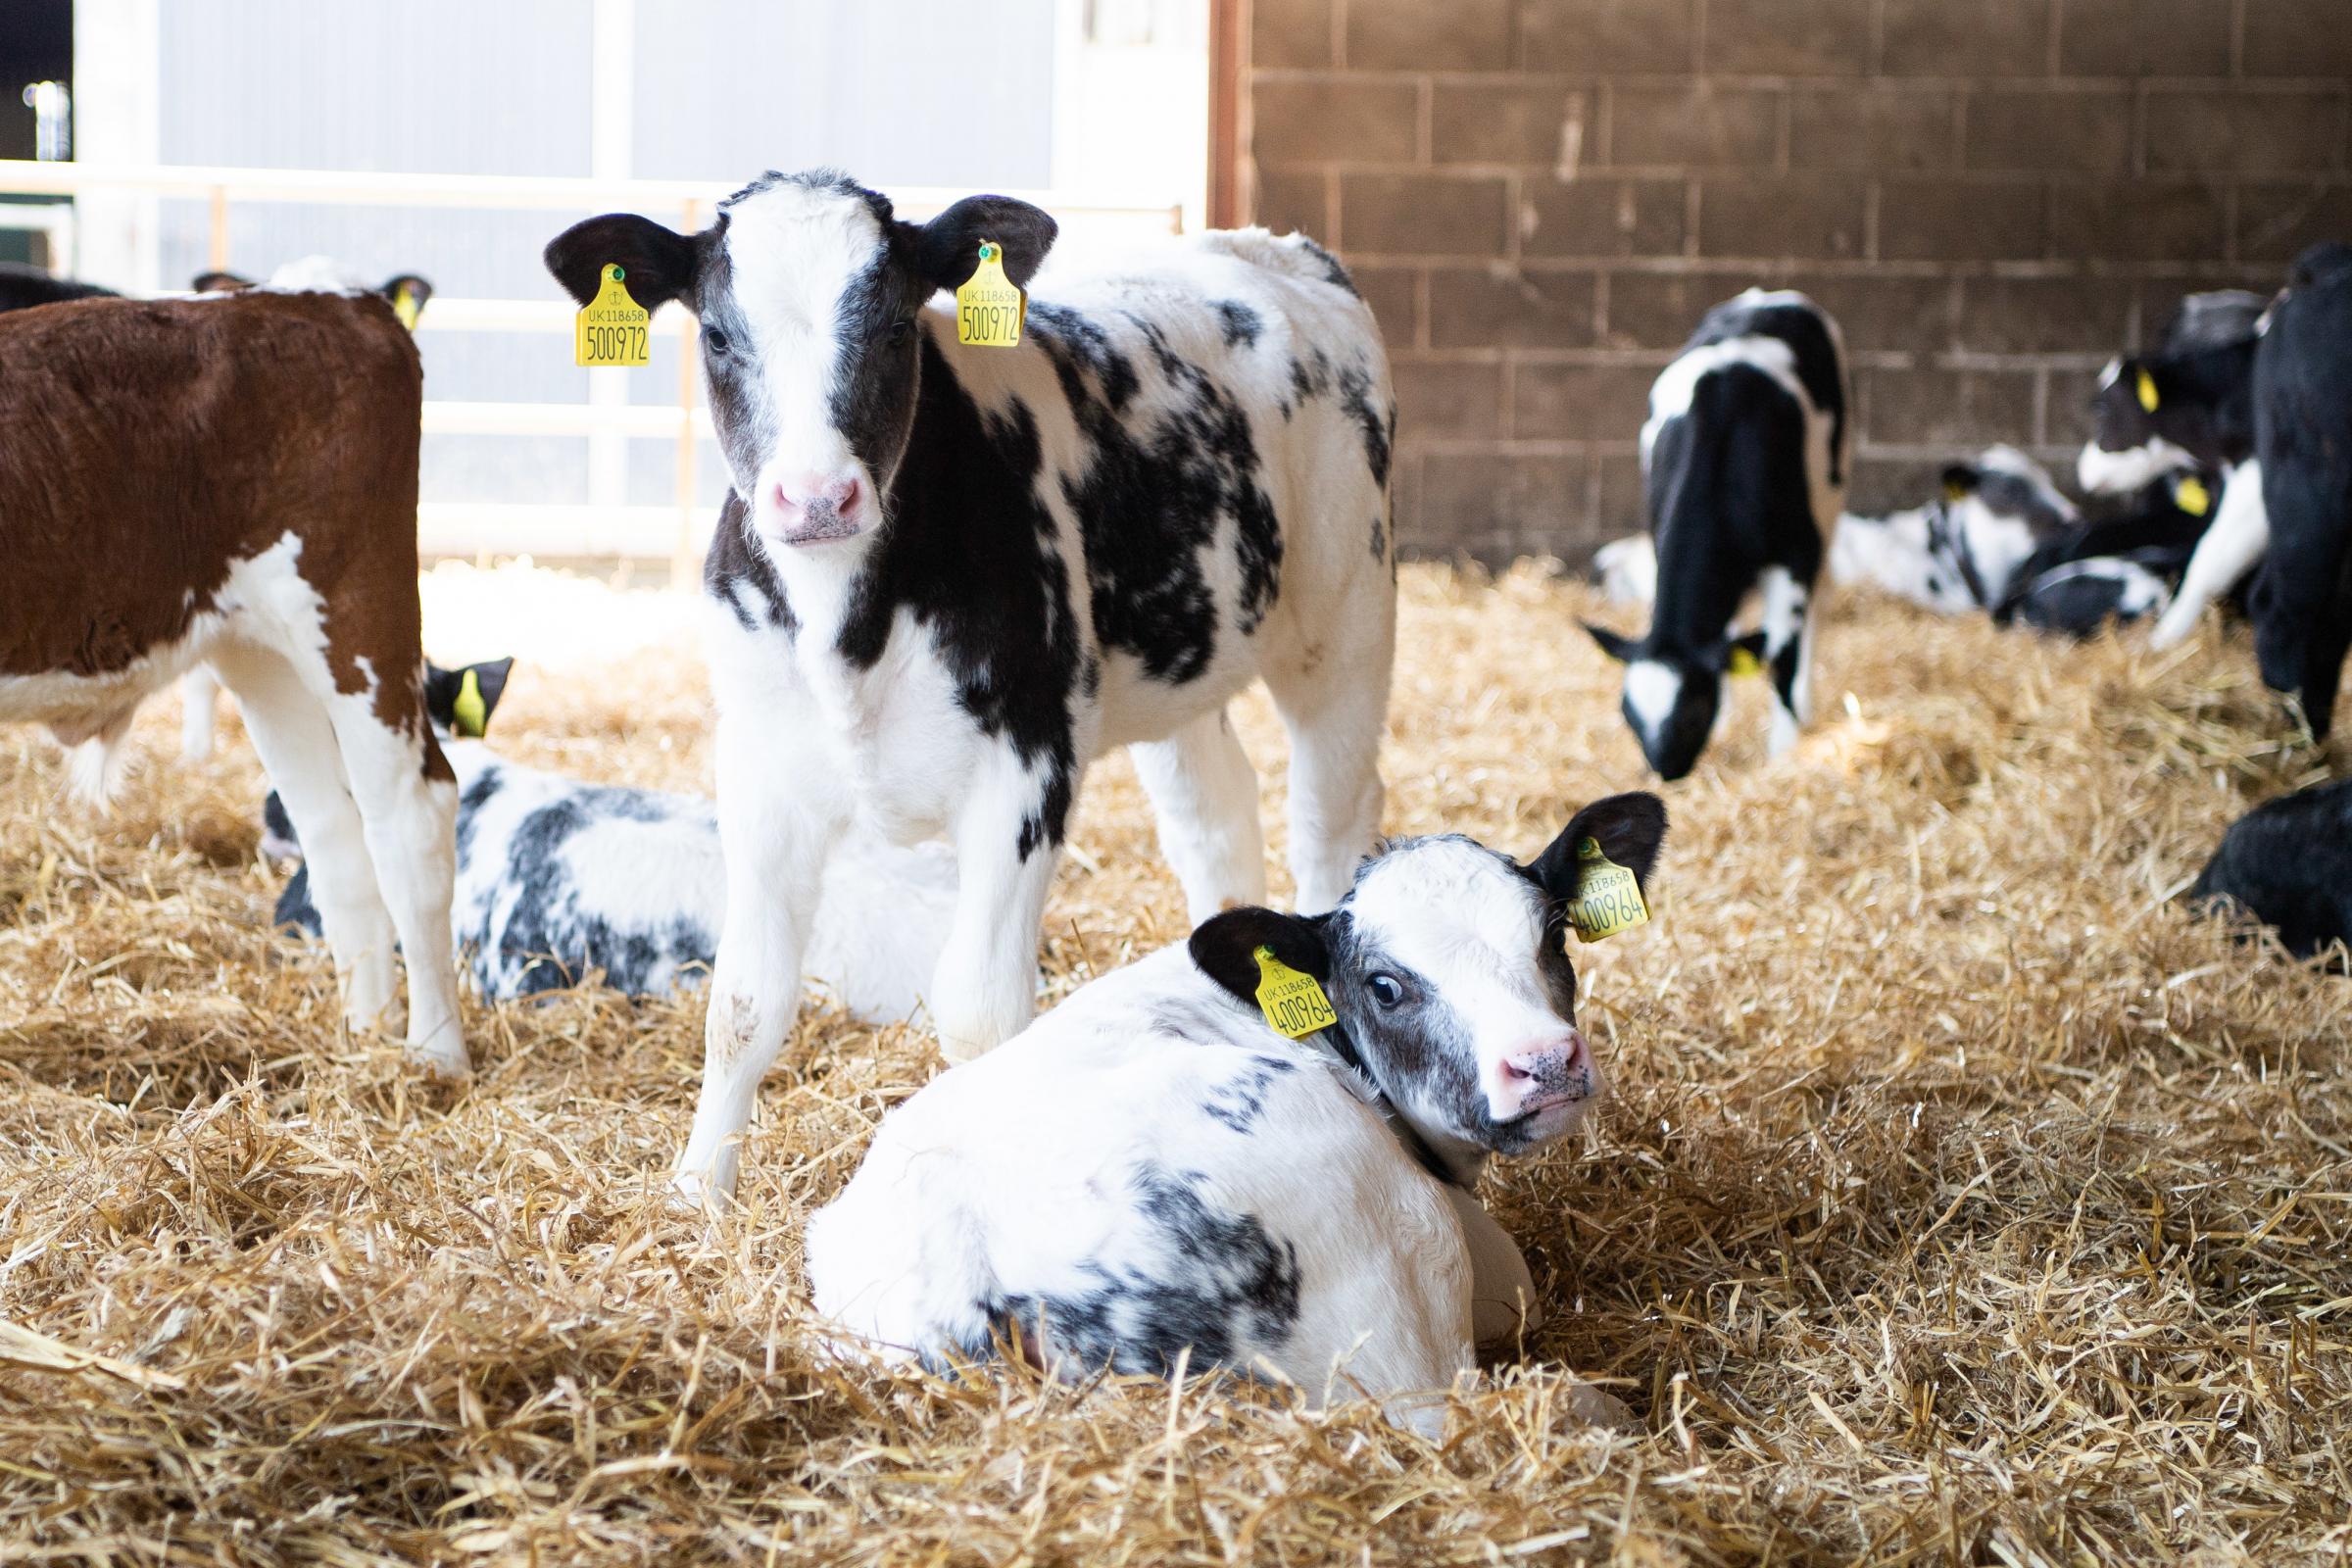 All sexed semen replacement heifers are born in the first three weeks of the spring block calving period, with the remainder of the calves being British Blue, Hereford, Angus or Wagyu crosses Ref:RH300321210